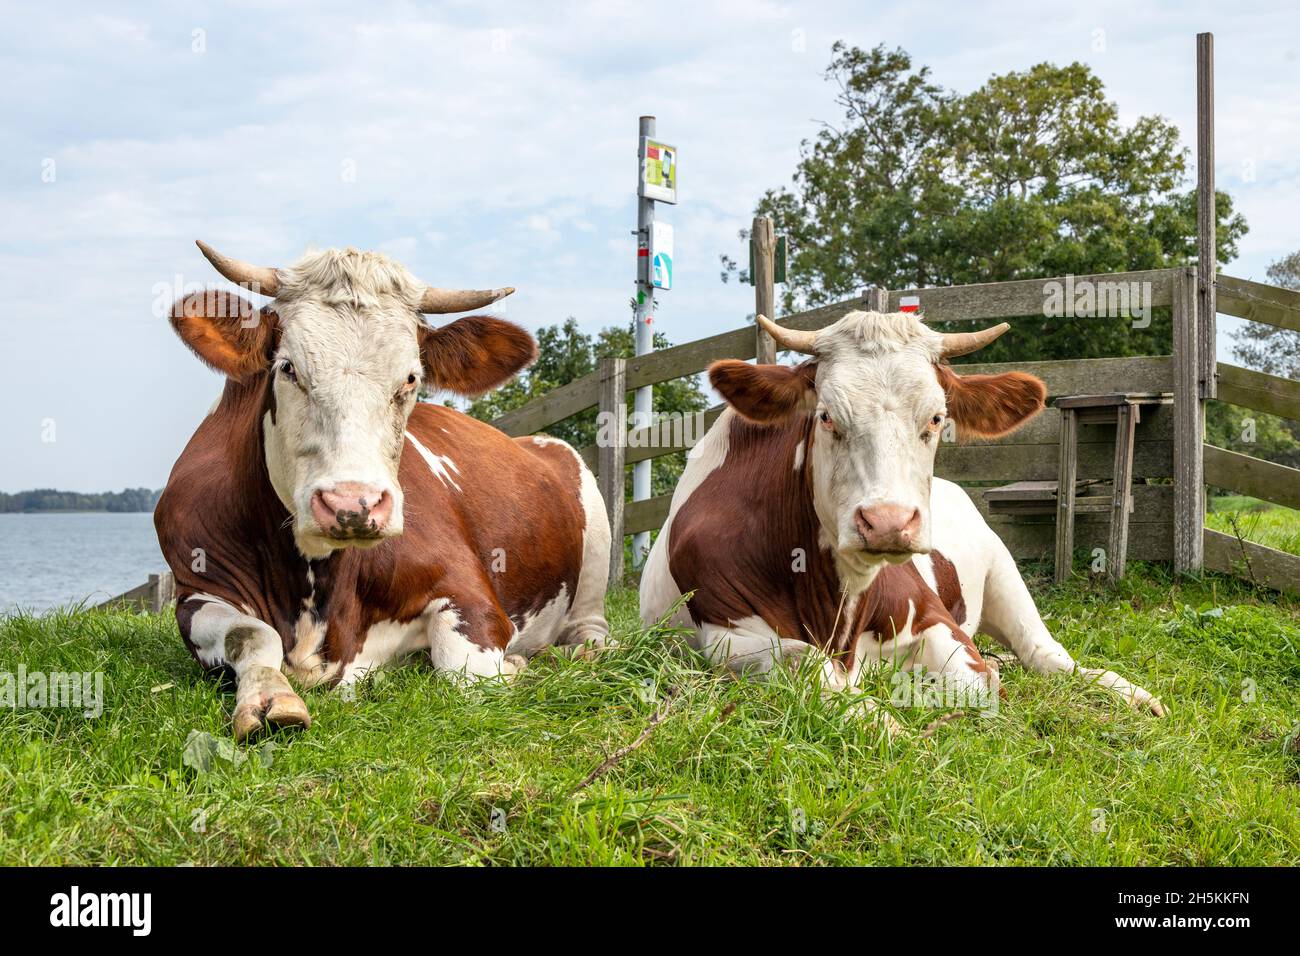 Red and white cows, breed of cattle montbeliard, lazy lying on a dyke in front of a gate, looking alert and suspicious Stock Photo